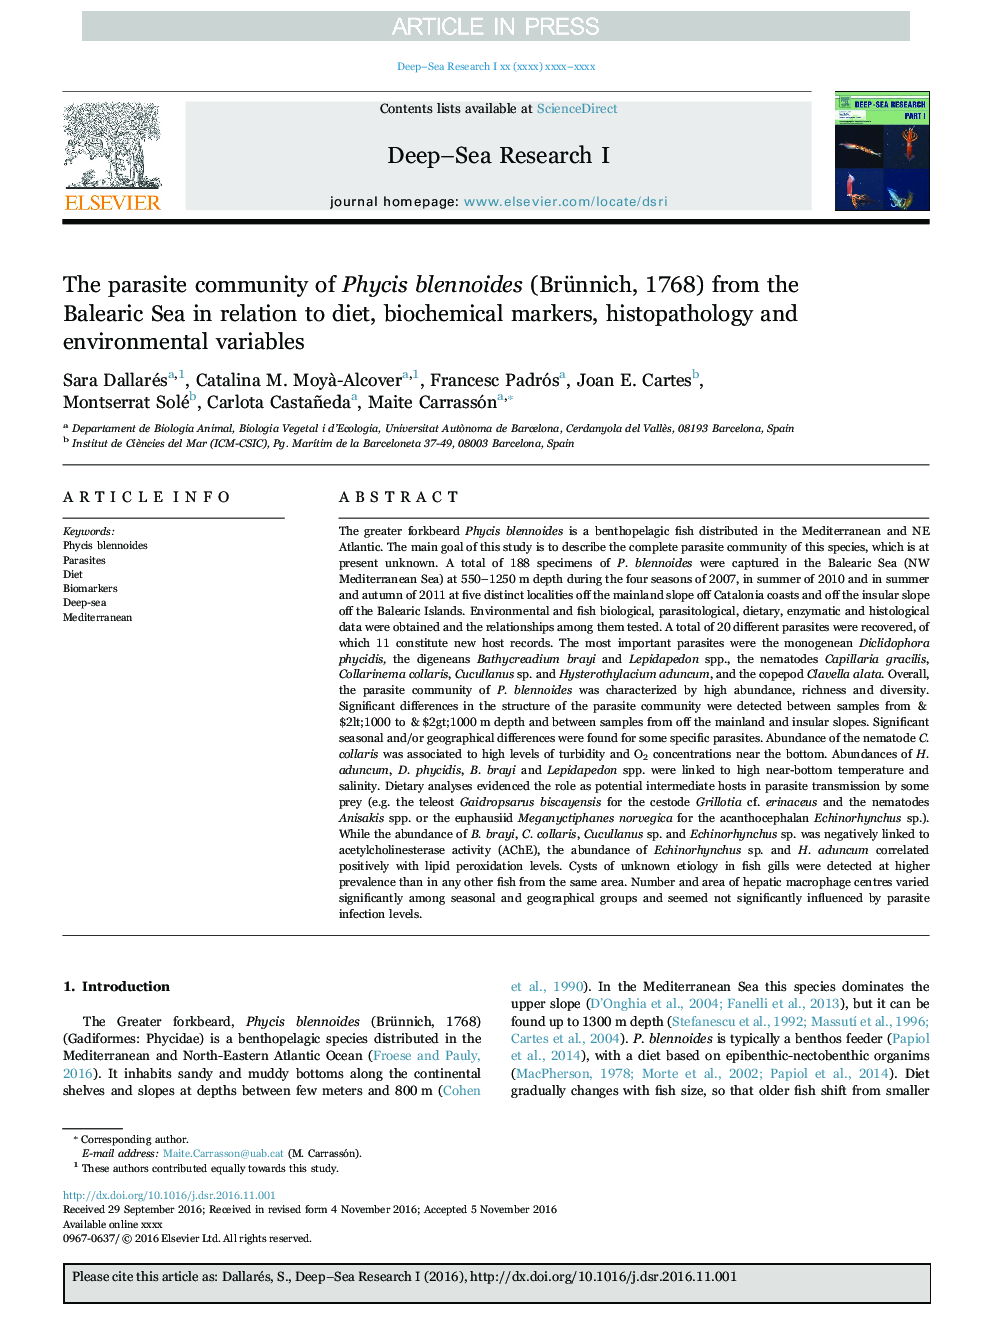 The parasite community of Phycis blennoides (Brünnich, 1768) from the Balearic Sea in relation to diet, biochemical markers, histopathology and environmental variables